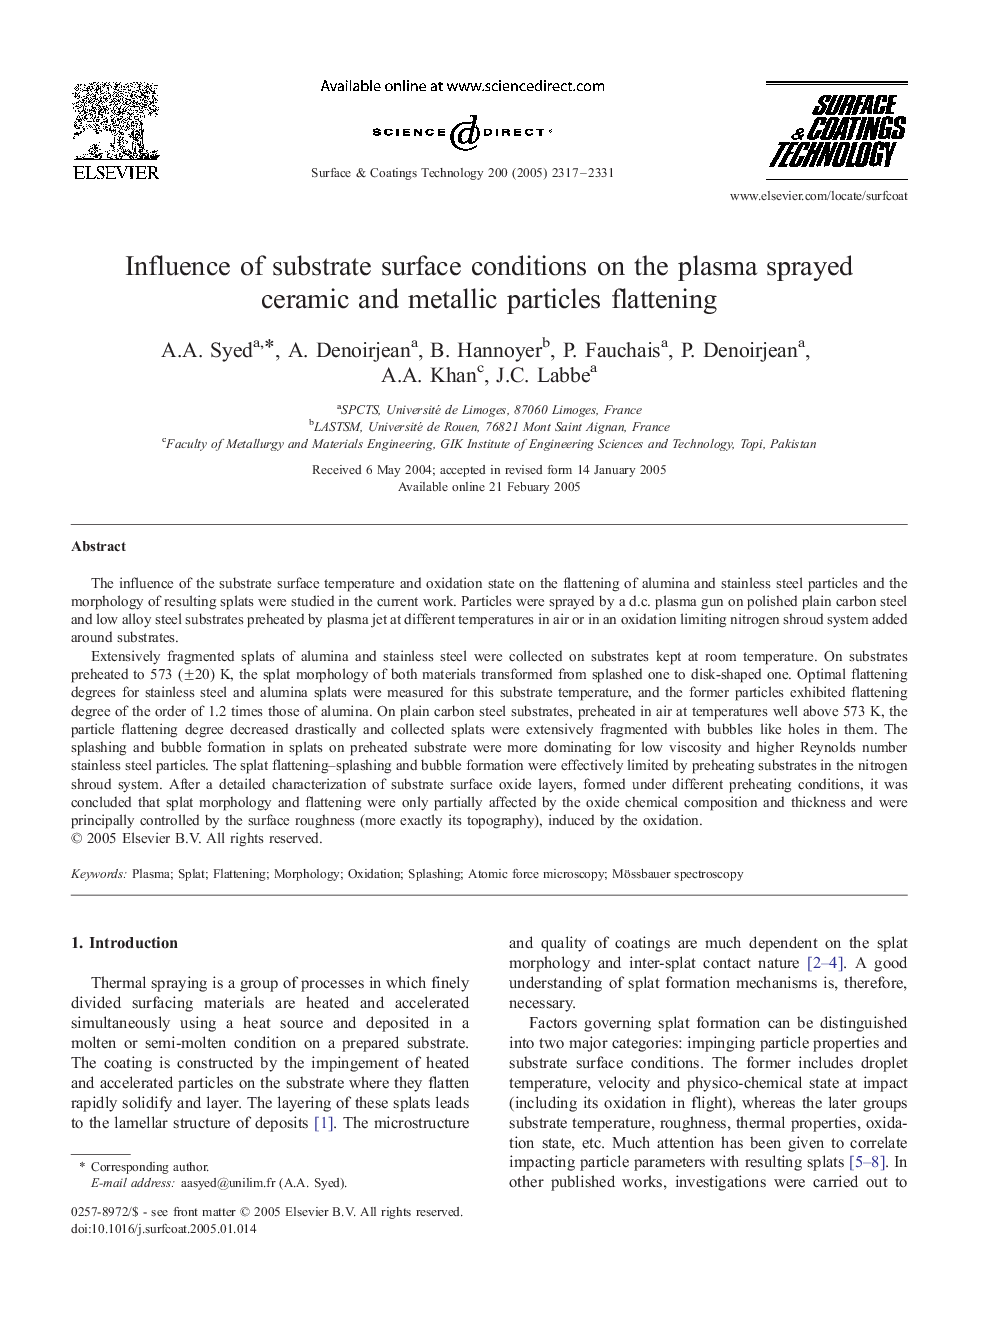 Influence of substrate surface conditions on the plasma sprayed ceramic and metallic particles flattening